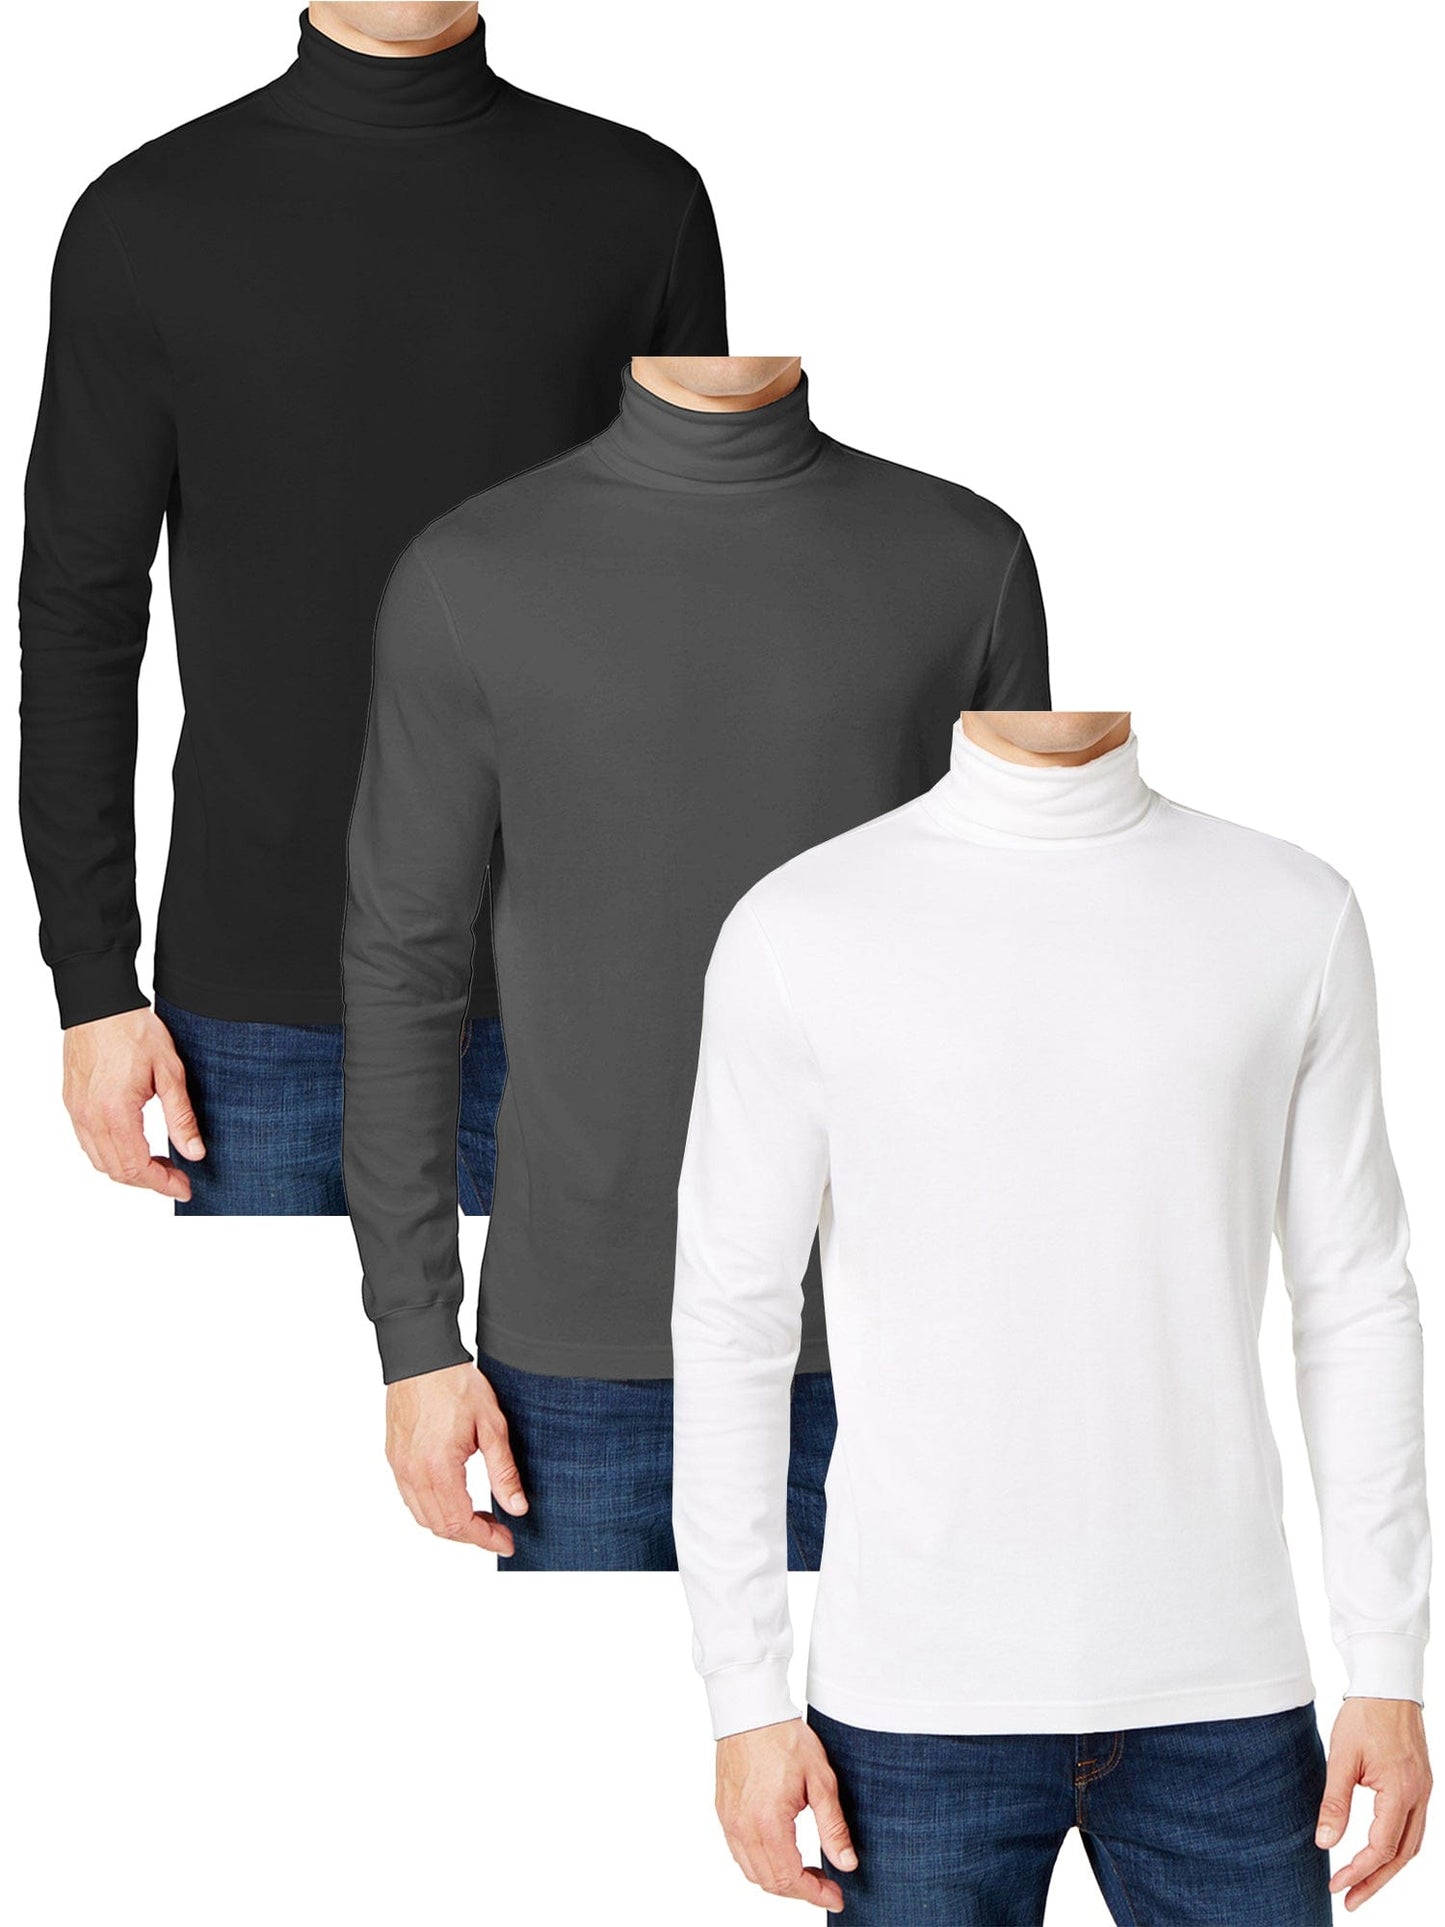 3-Pack Men's Long Sleeve Turtle Neck T-Shirt (Sizes, S to 2XL) - GalaxybyHarvic